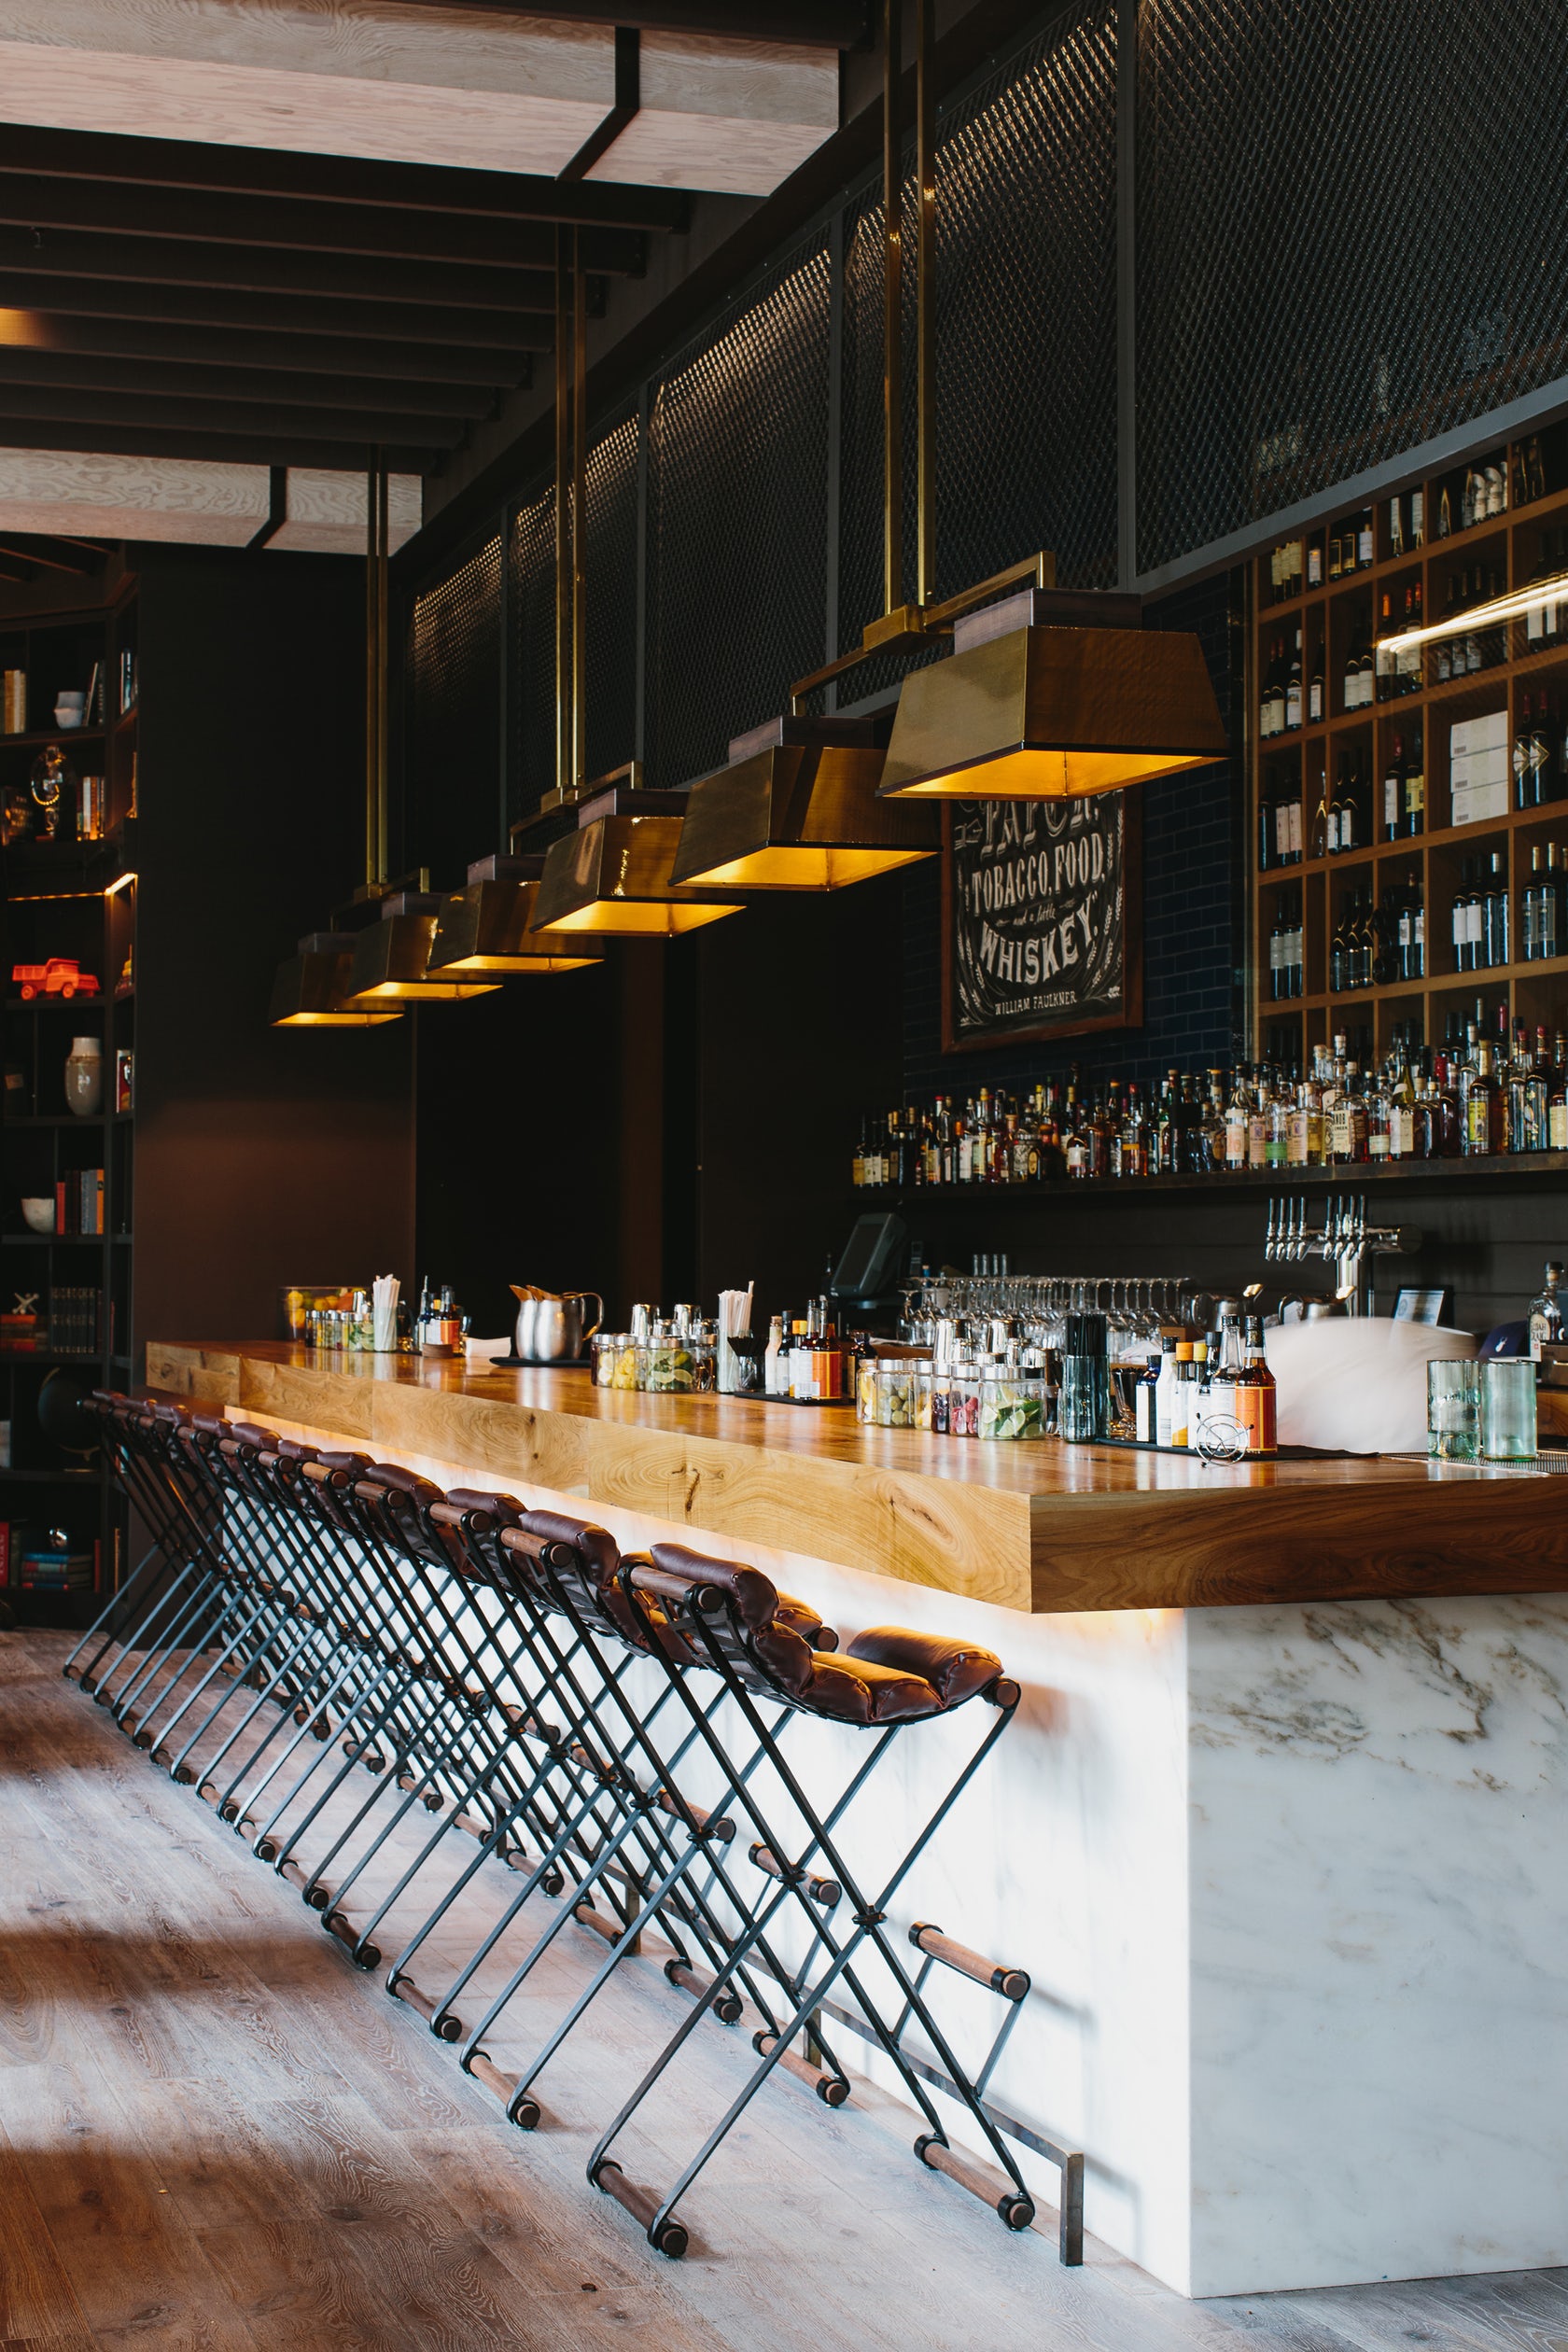 7 Tips to Turn Your Bar into a Modern Industrial Interior Design! 2